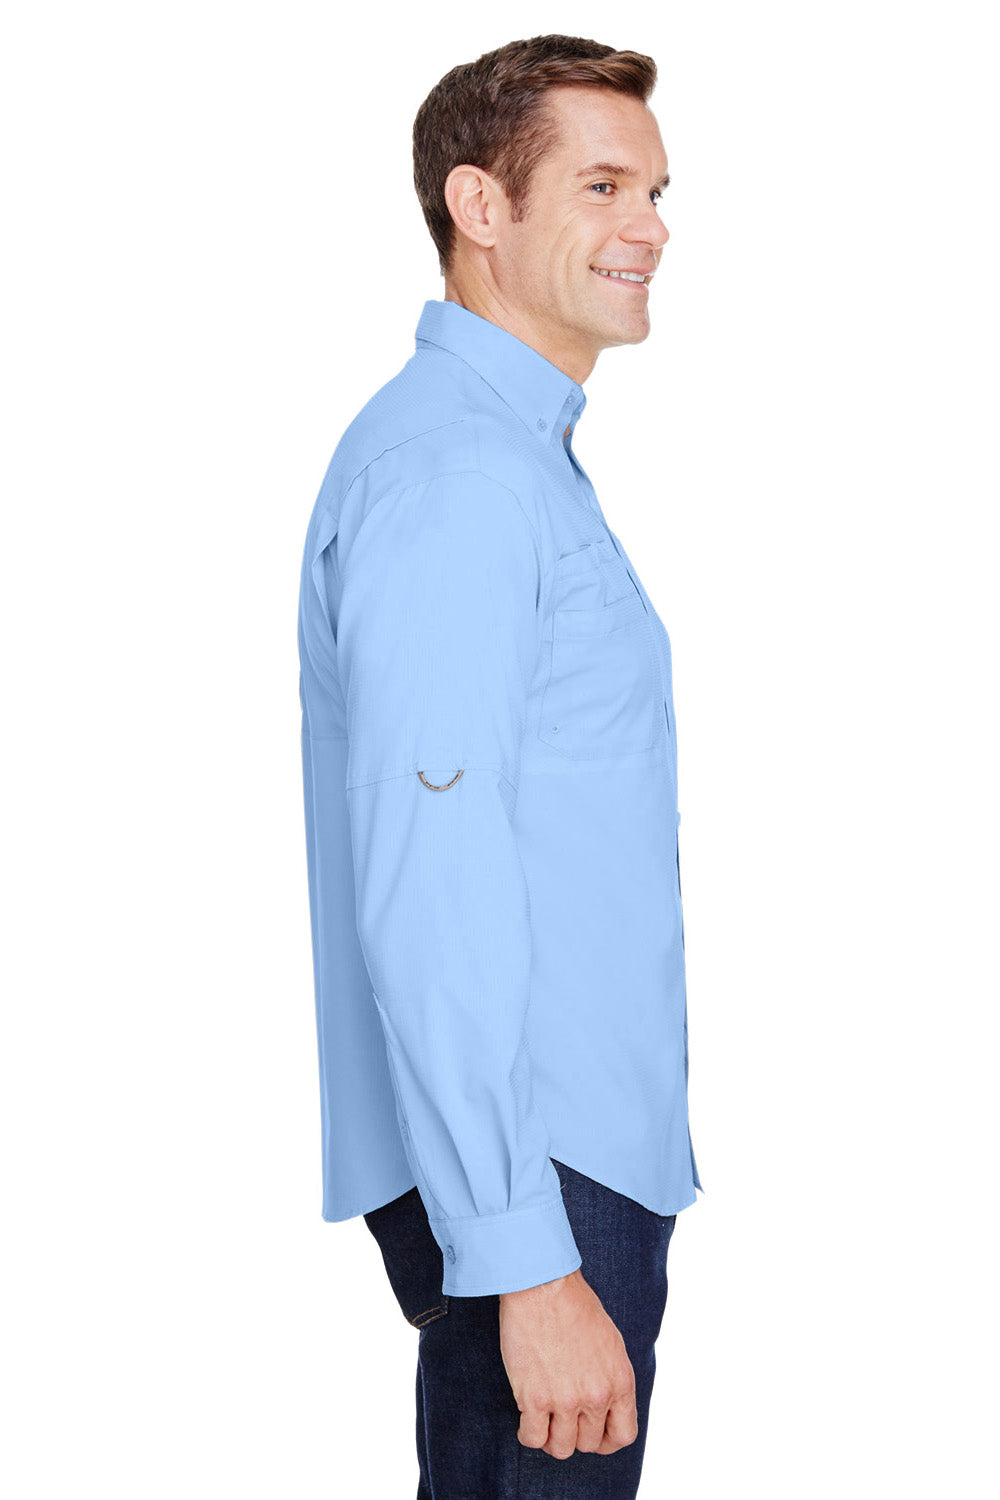 Columbia Mens Tamiami II Moisture Wicking Long Sleeve Button Down Shirt w/  Double Pockets - Cool Grey